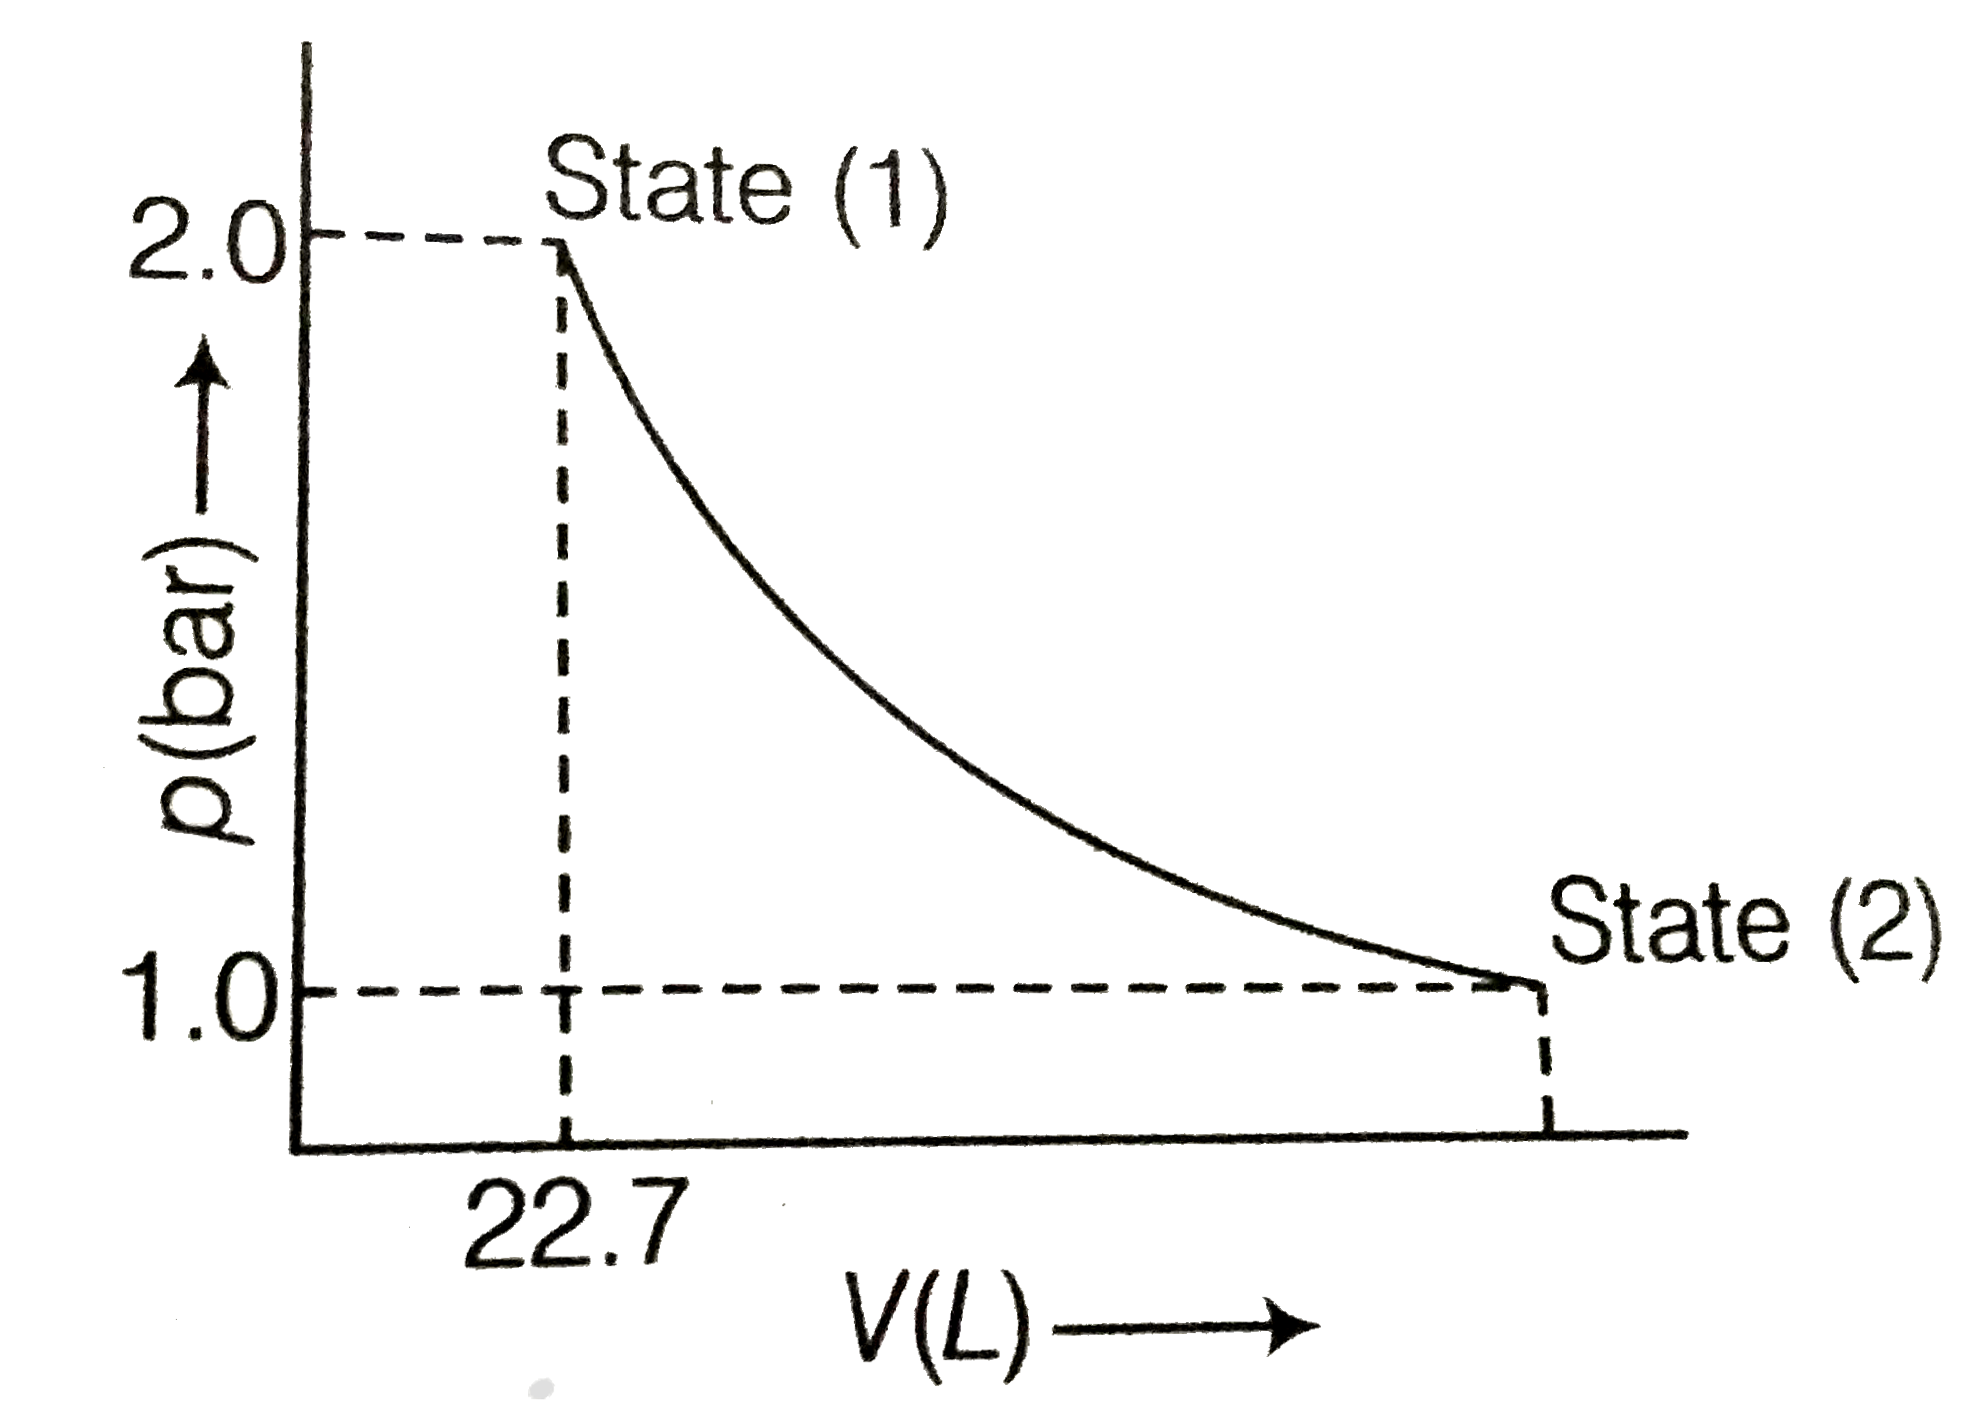 1.0 mol of a monoatomic ideal gas is expanded from state (1) to state (2) as shown in figure. Calculate the work done for the expansion of gas from state (1) to state (2) at 298 K.